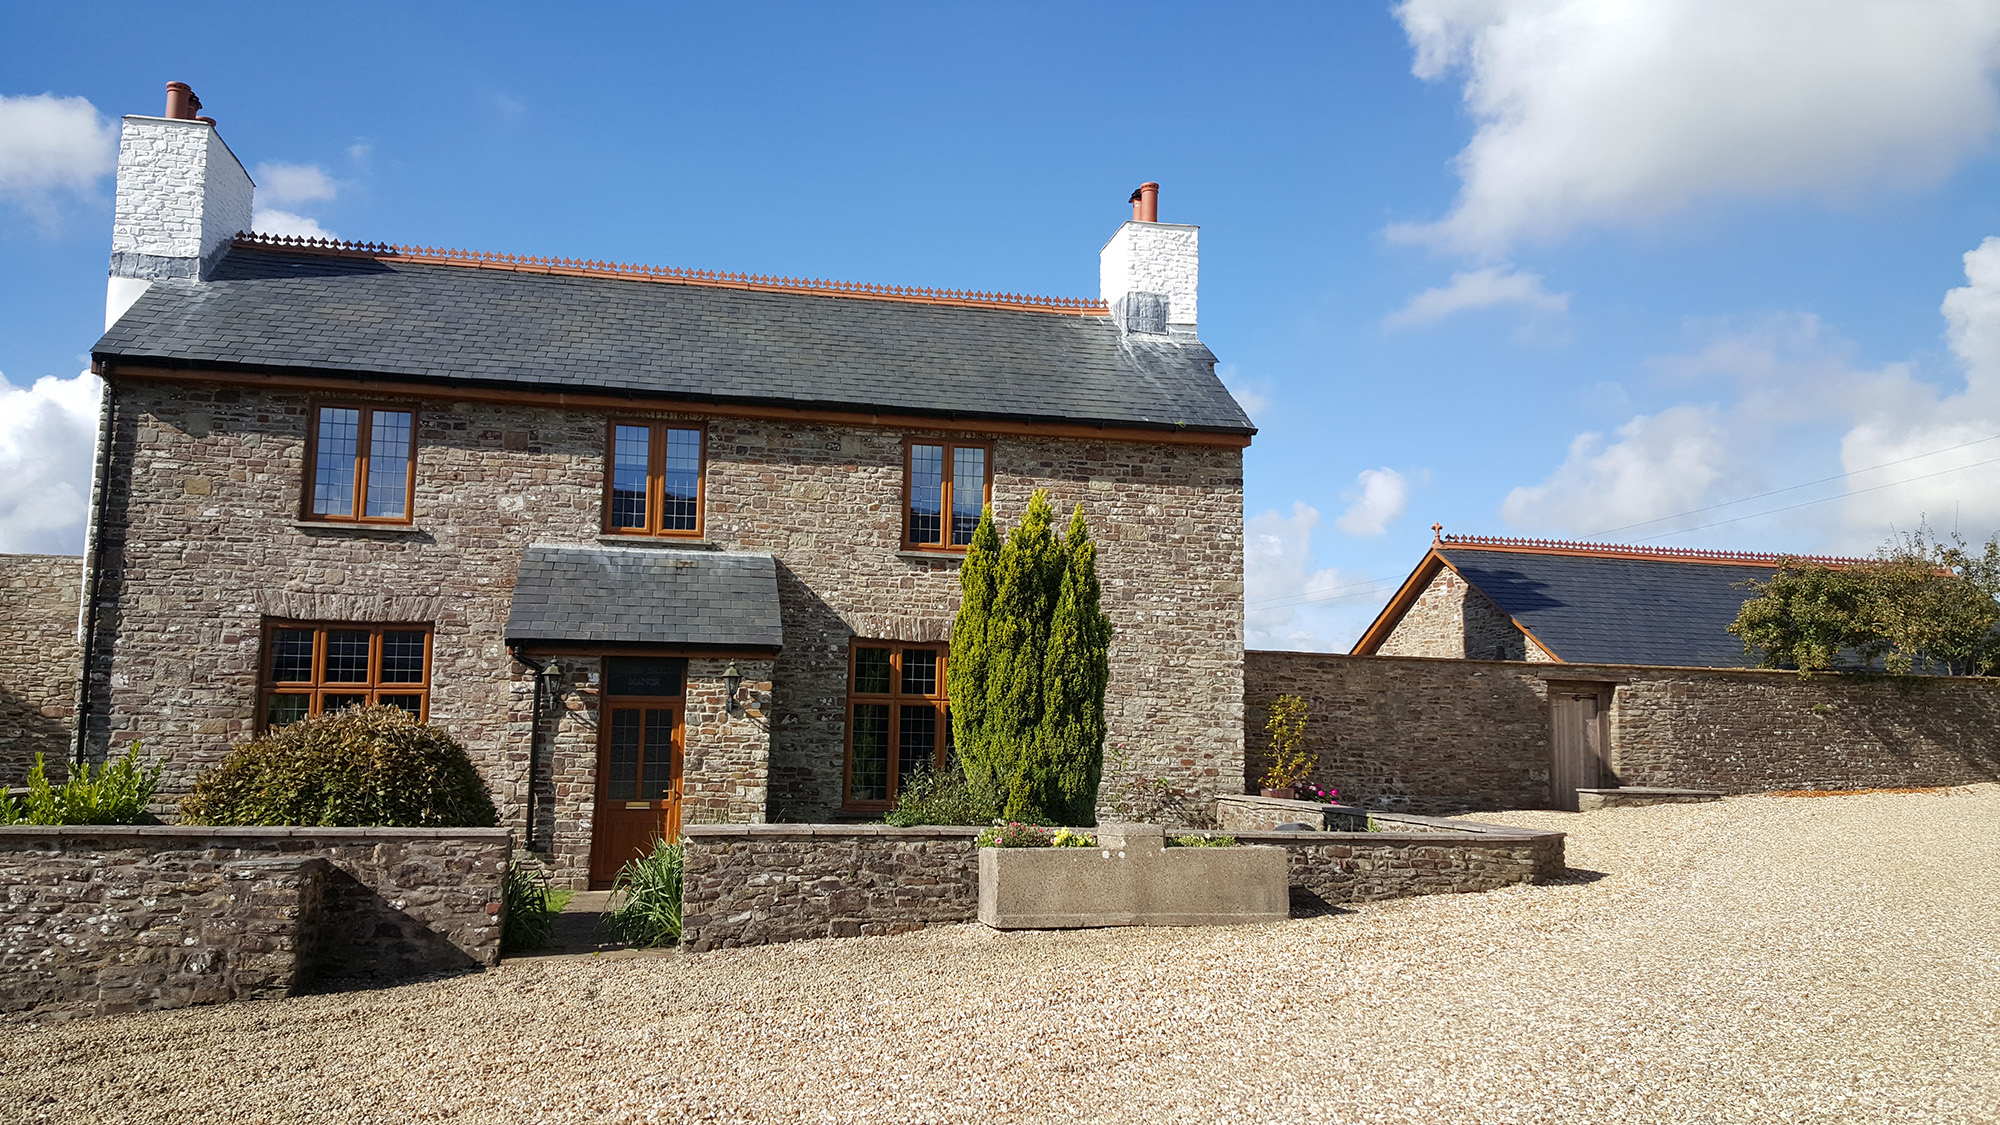 5 bed country house to rent in Atherington, Devon - Property Image 1